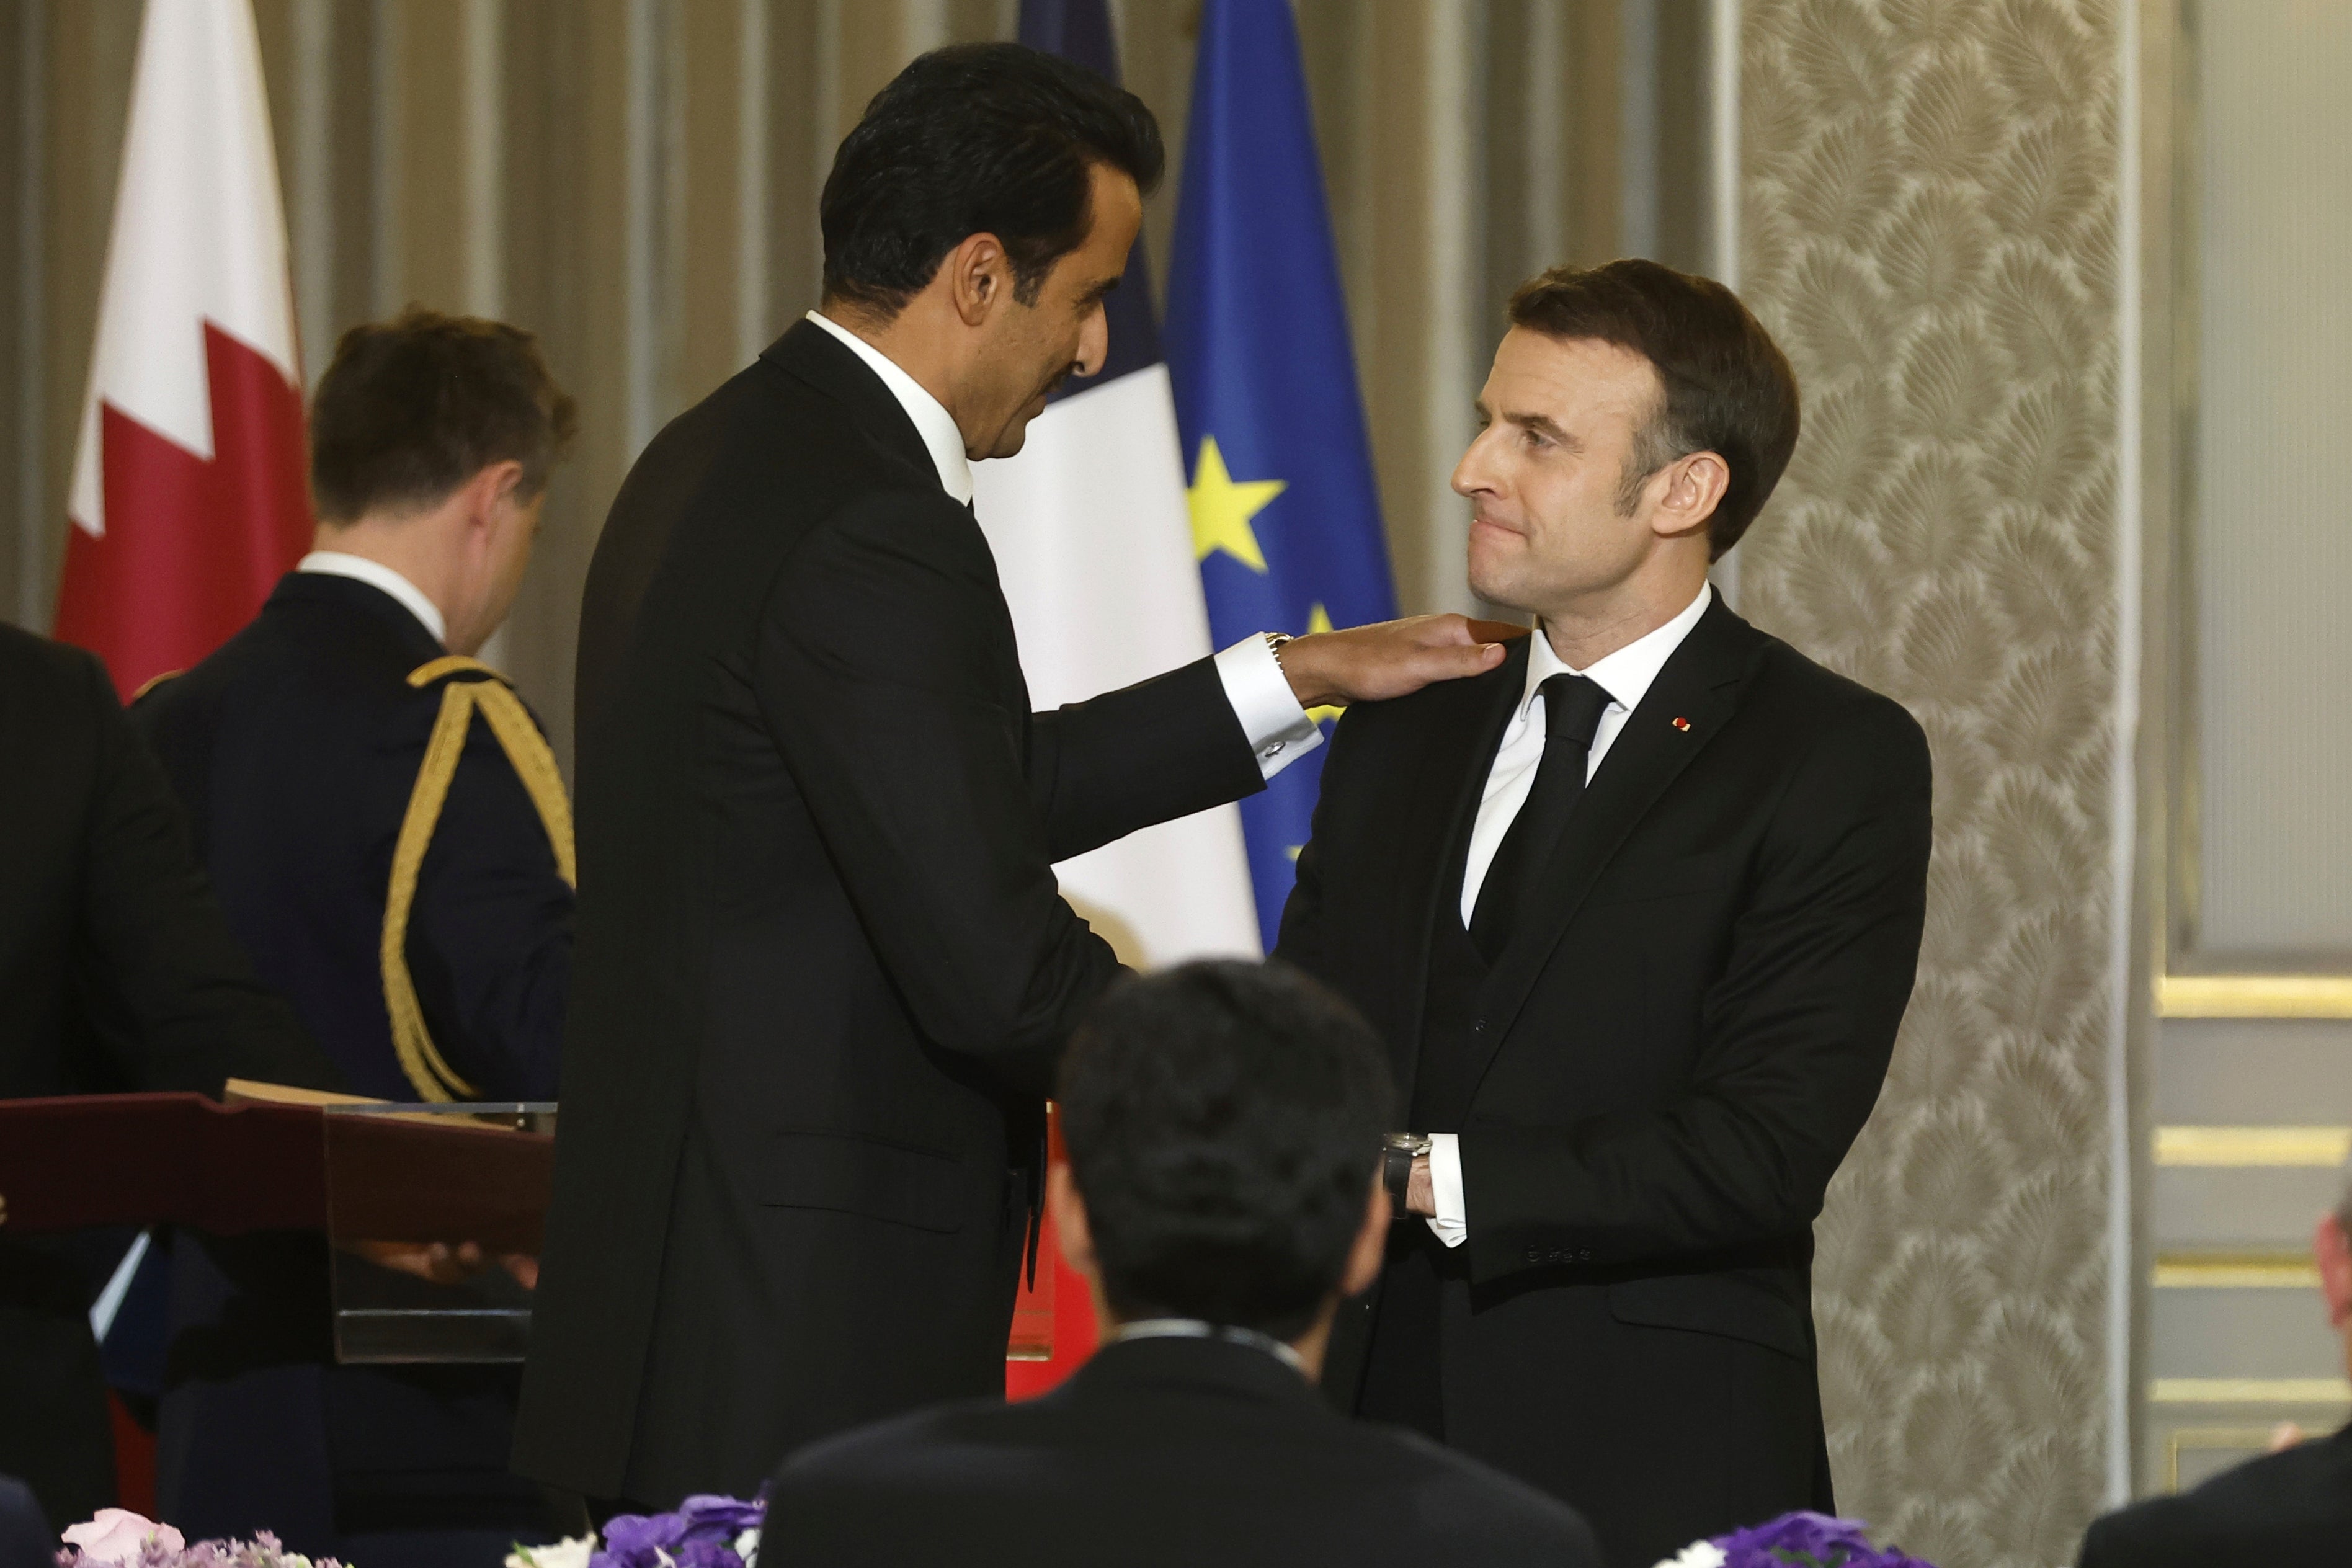 Qatar’s special relationship with France can be traced to 2001